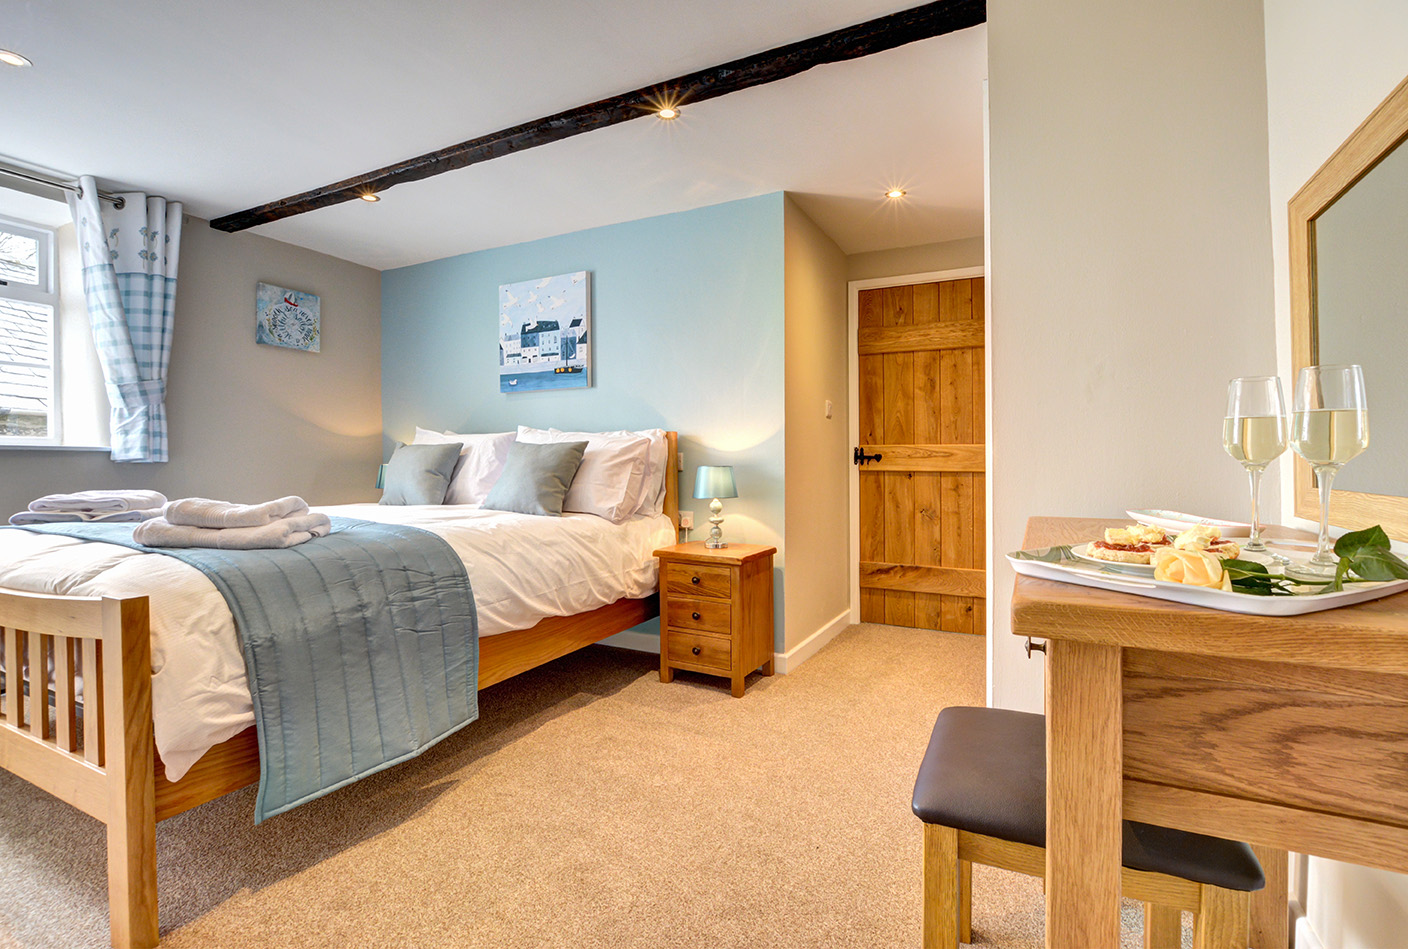 Bedroom two of Butterwell luxury self catering converted barn holiday cottage at Penrose Burden in North Cornwall 01.jpg